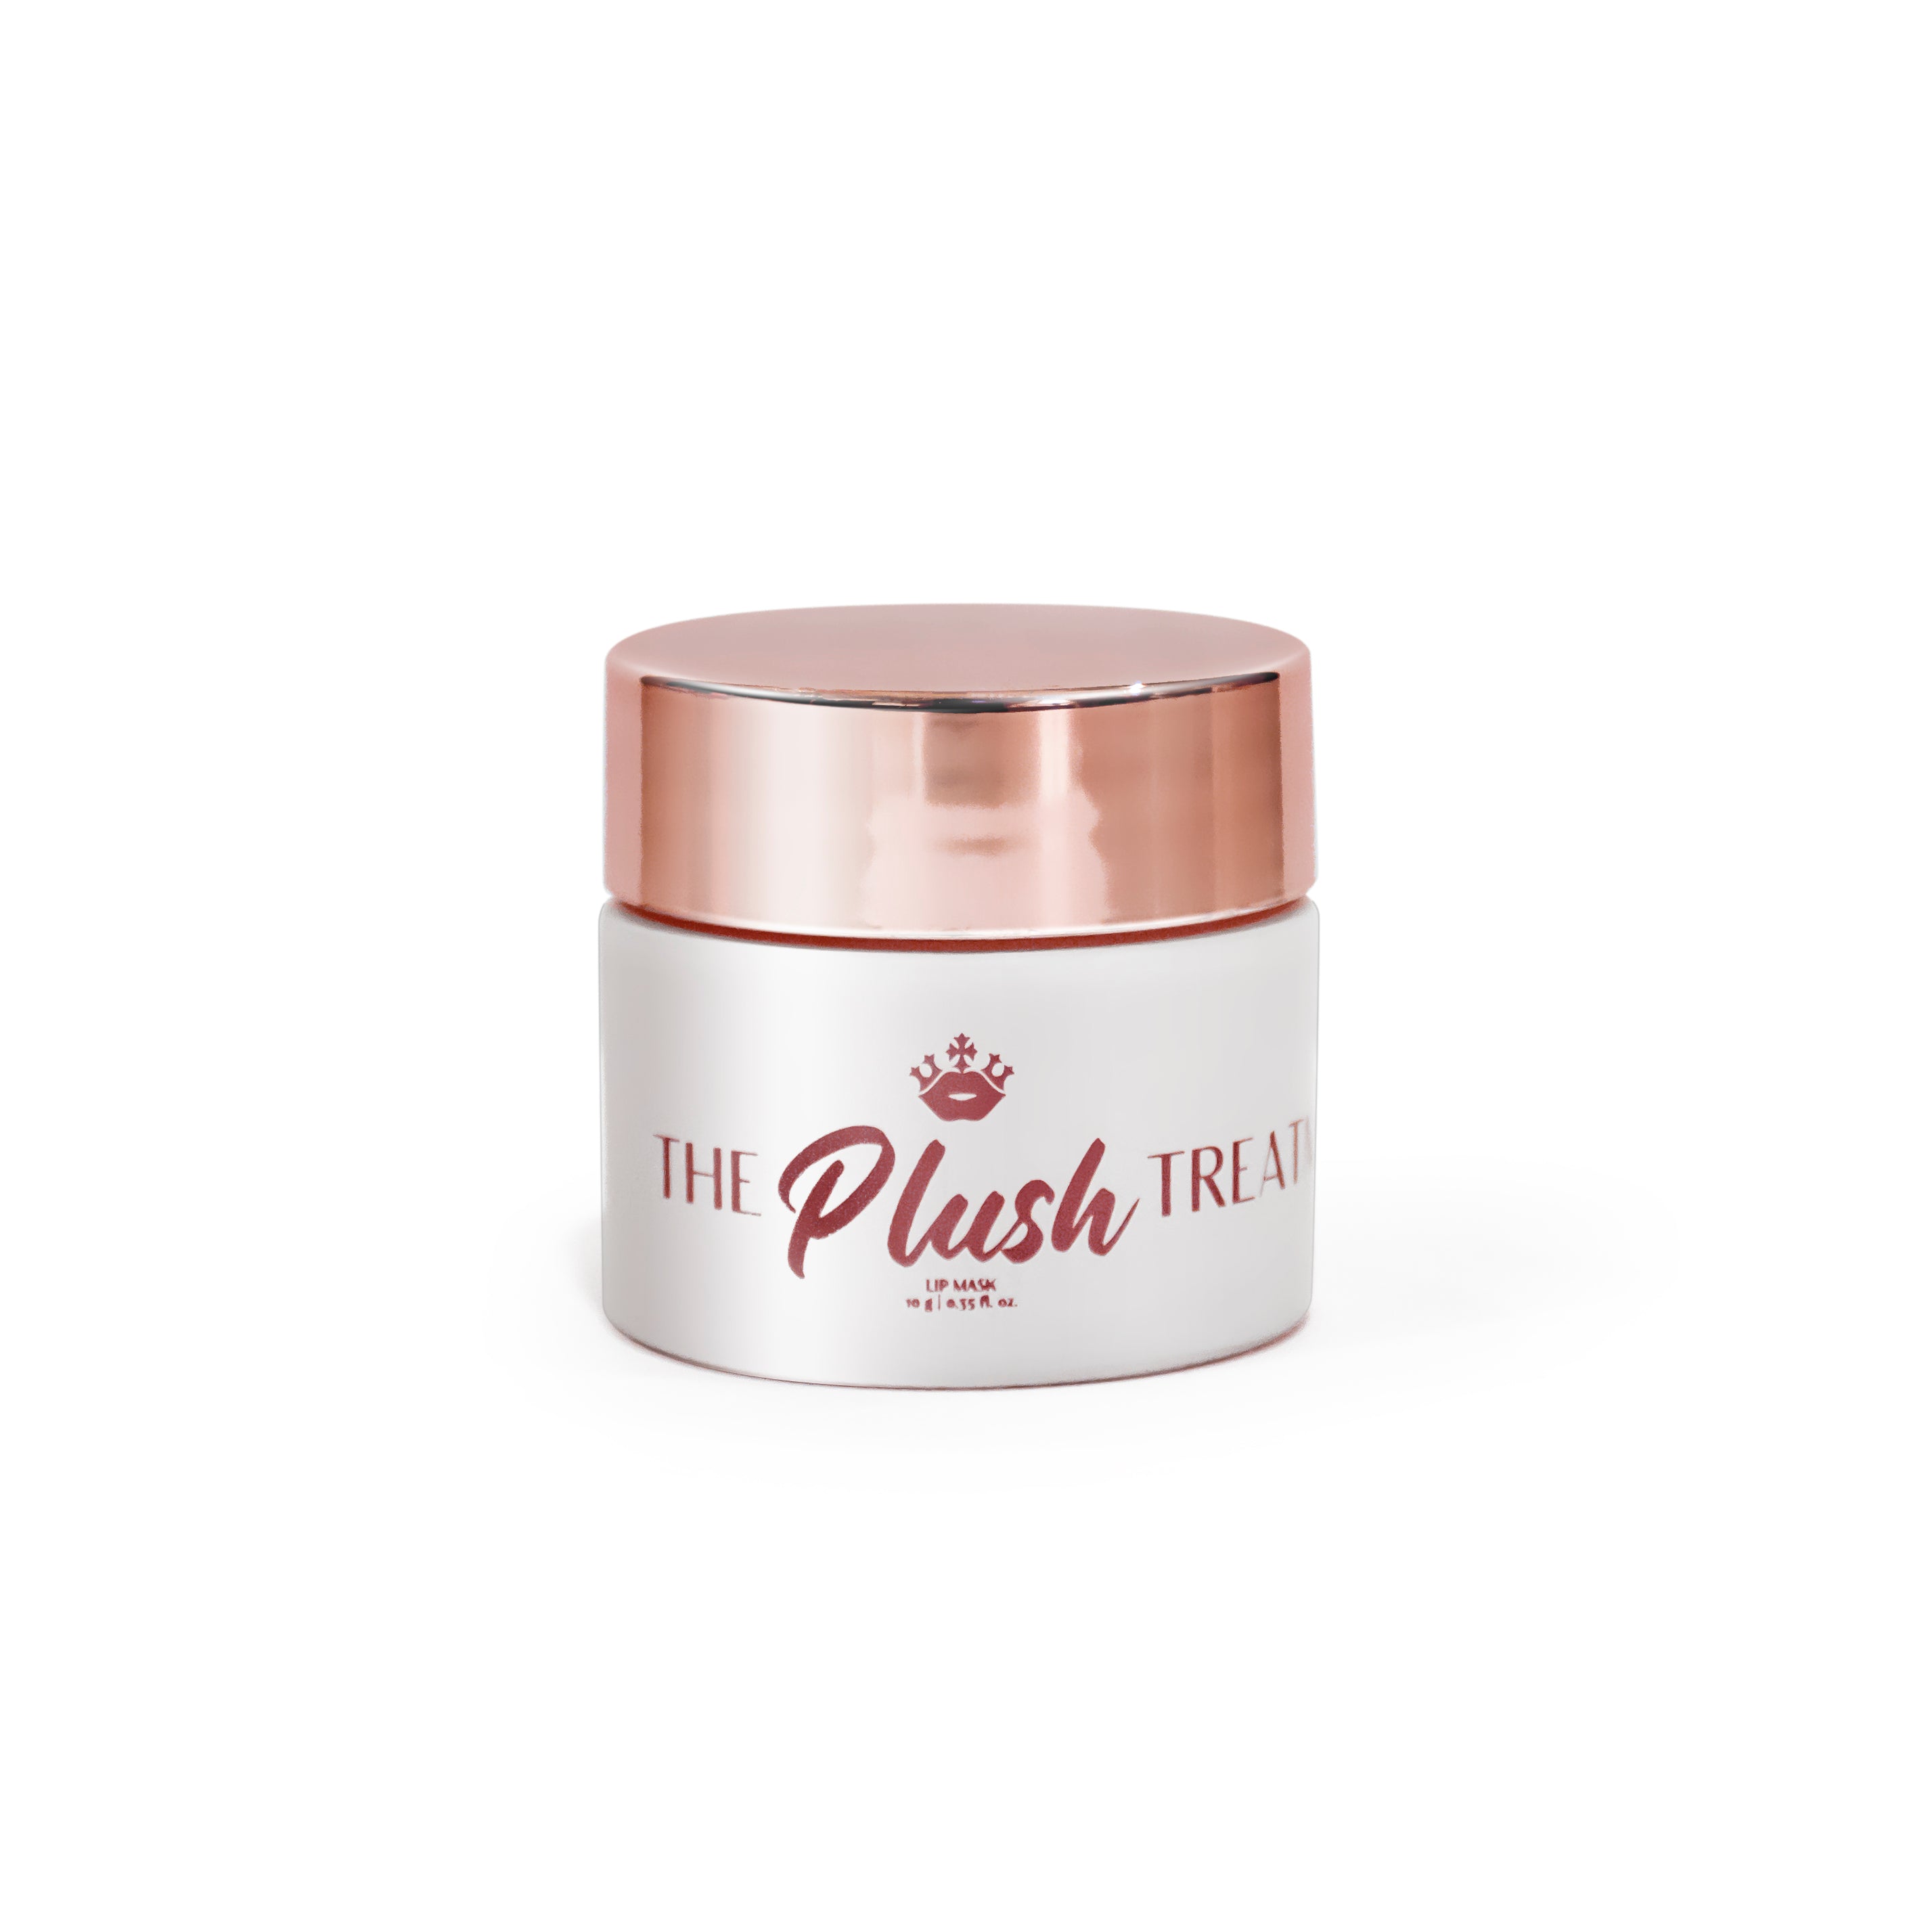 A matte white jar with a rose gold lid, it says The Plush Treatment and has a cute logo of lips with a crown on top of the lips. 